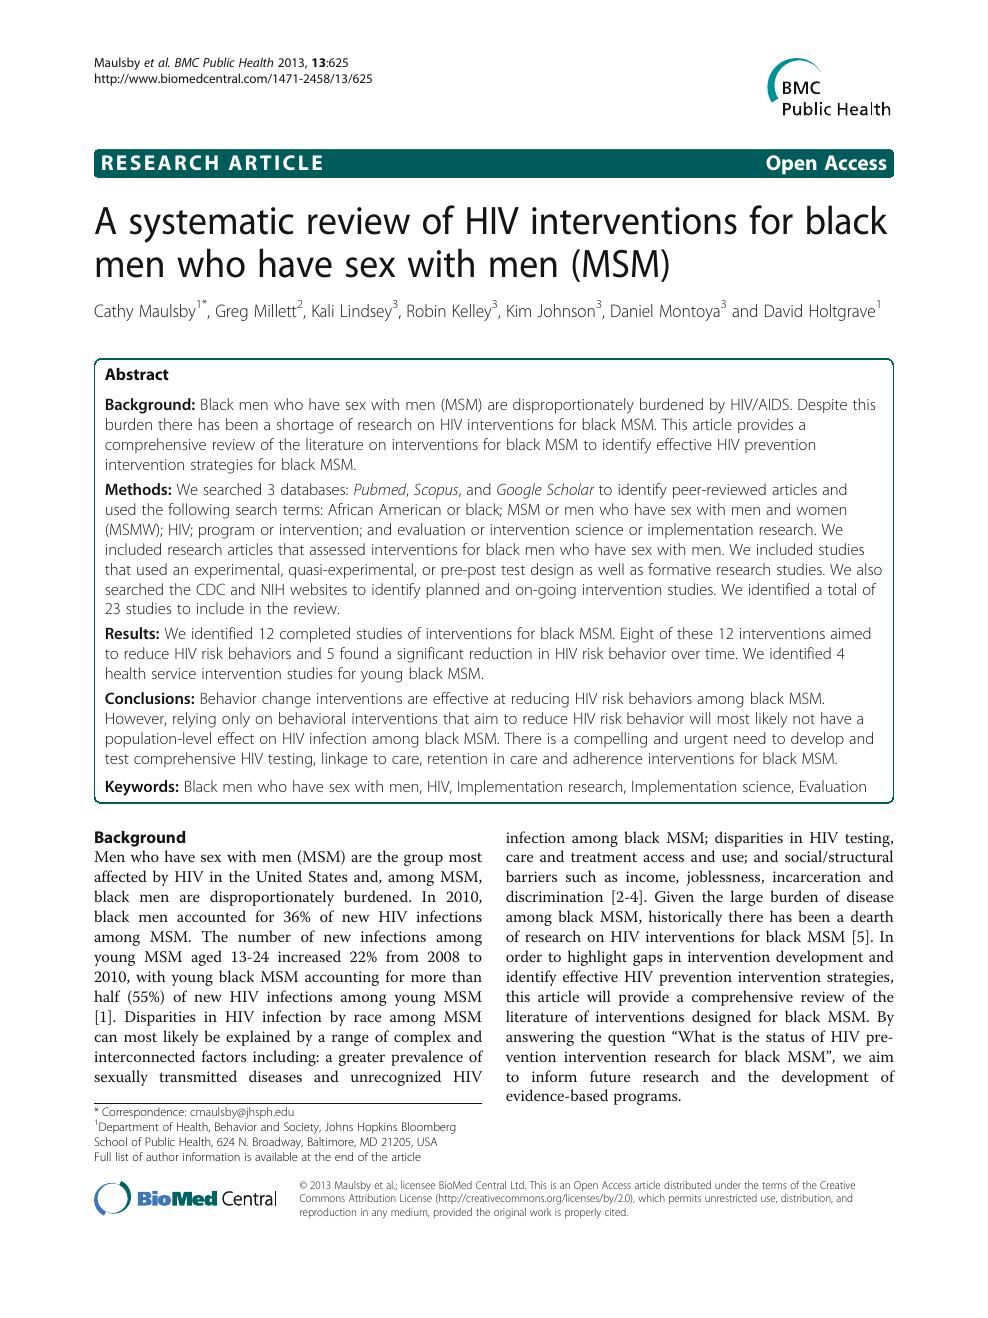 A Systematic Review Of Hiv Interventions For Black Men Who Have